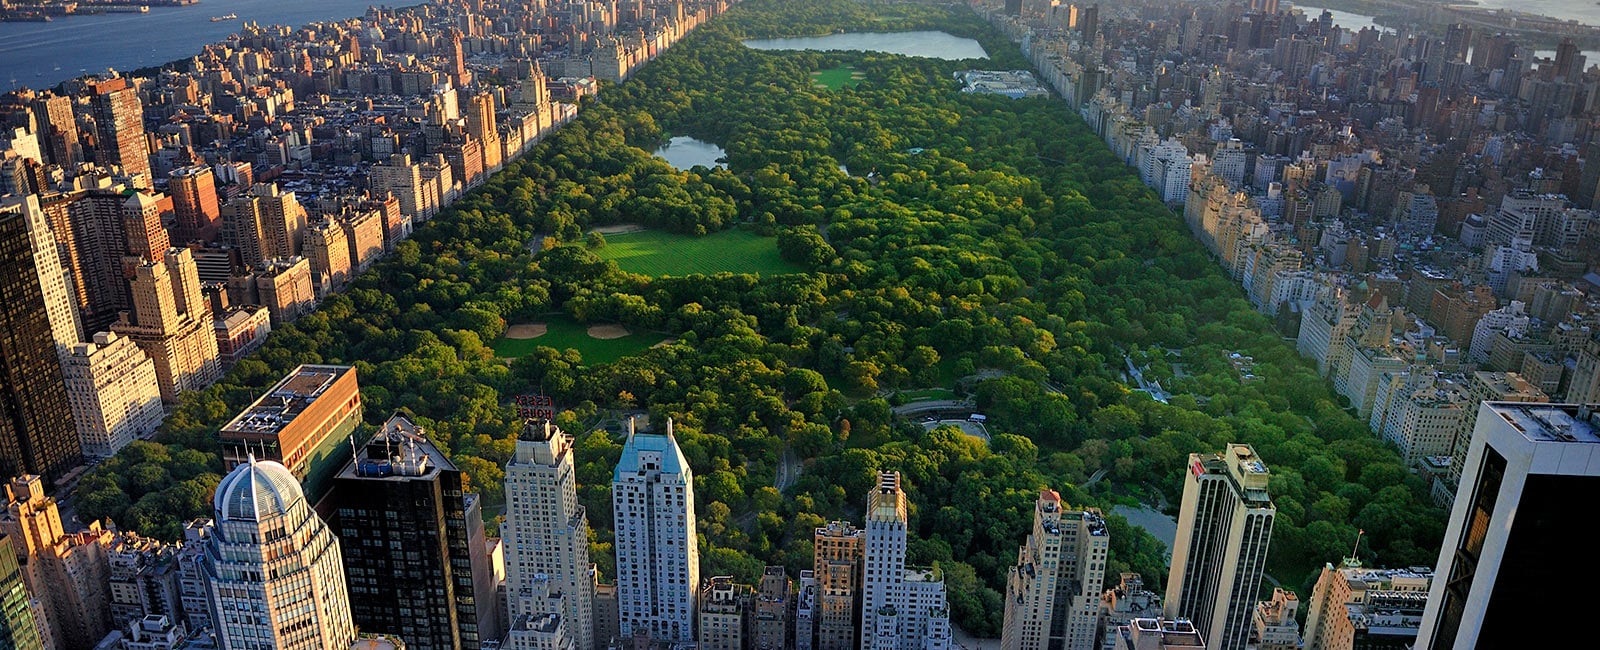 Enjoy a vacation in New York near Central Park with Hilton Grand Vacations